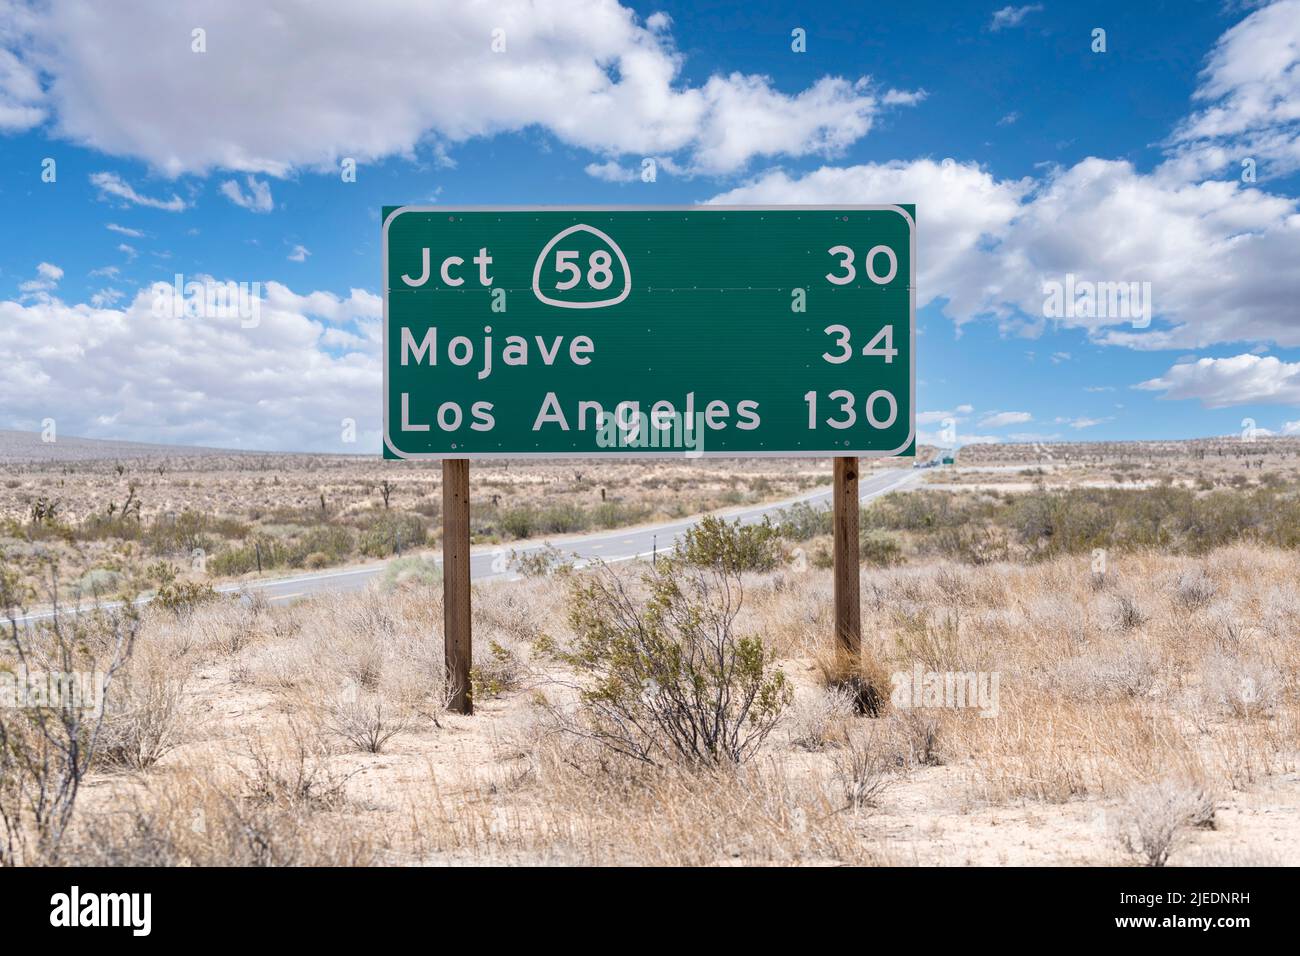 Mojave, Los Angeles and Route 58 junction highway sign on Route 14 in Southern California. Stock Photo